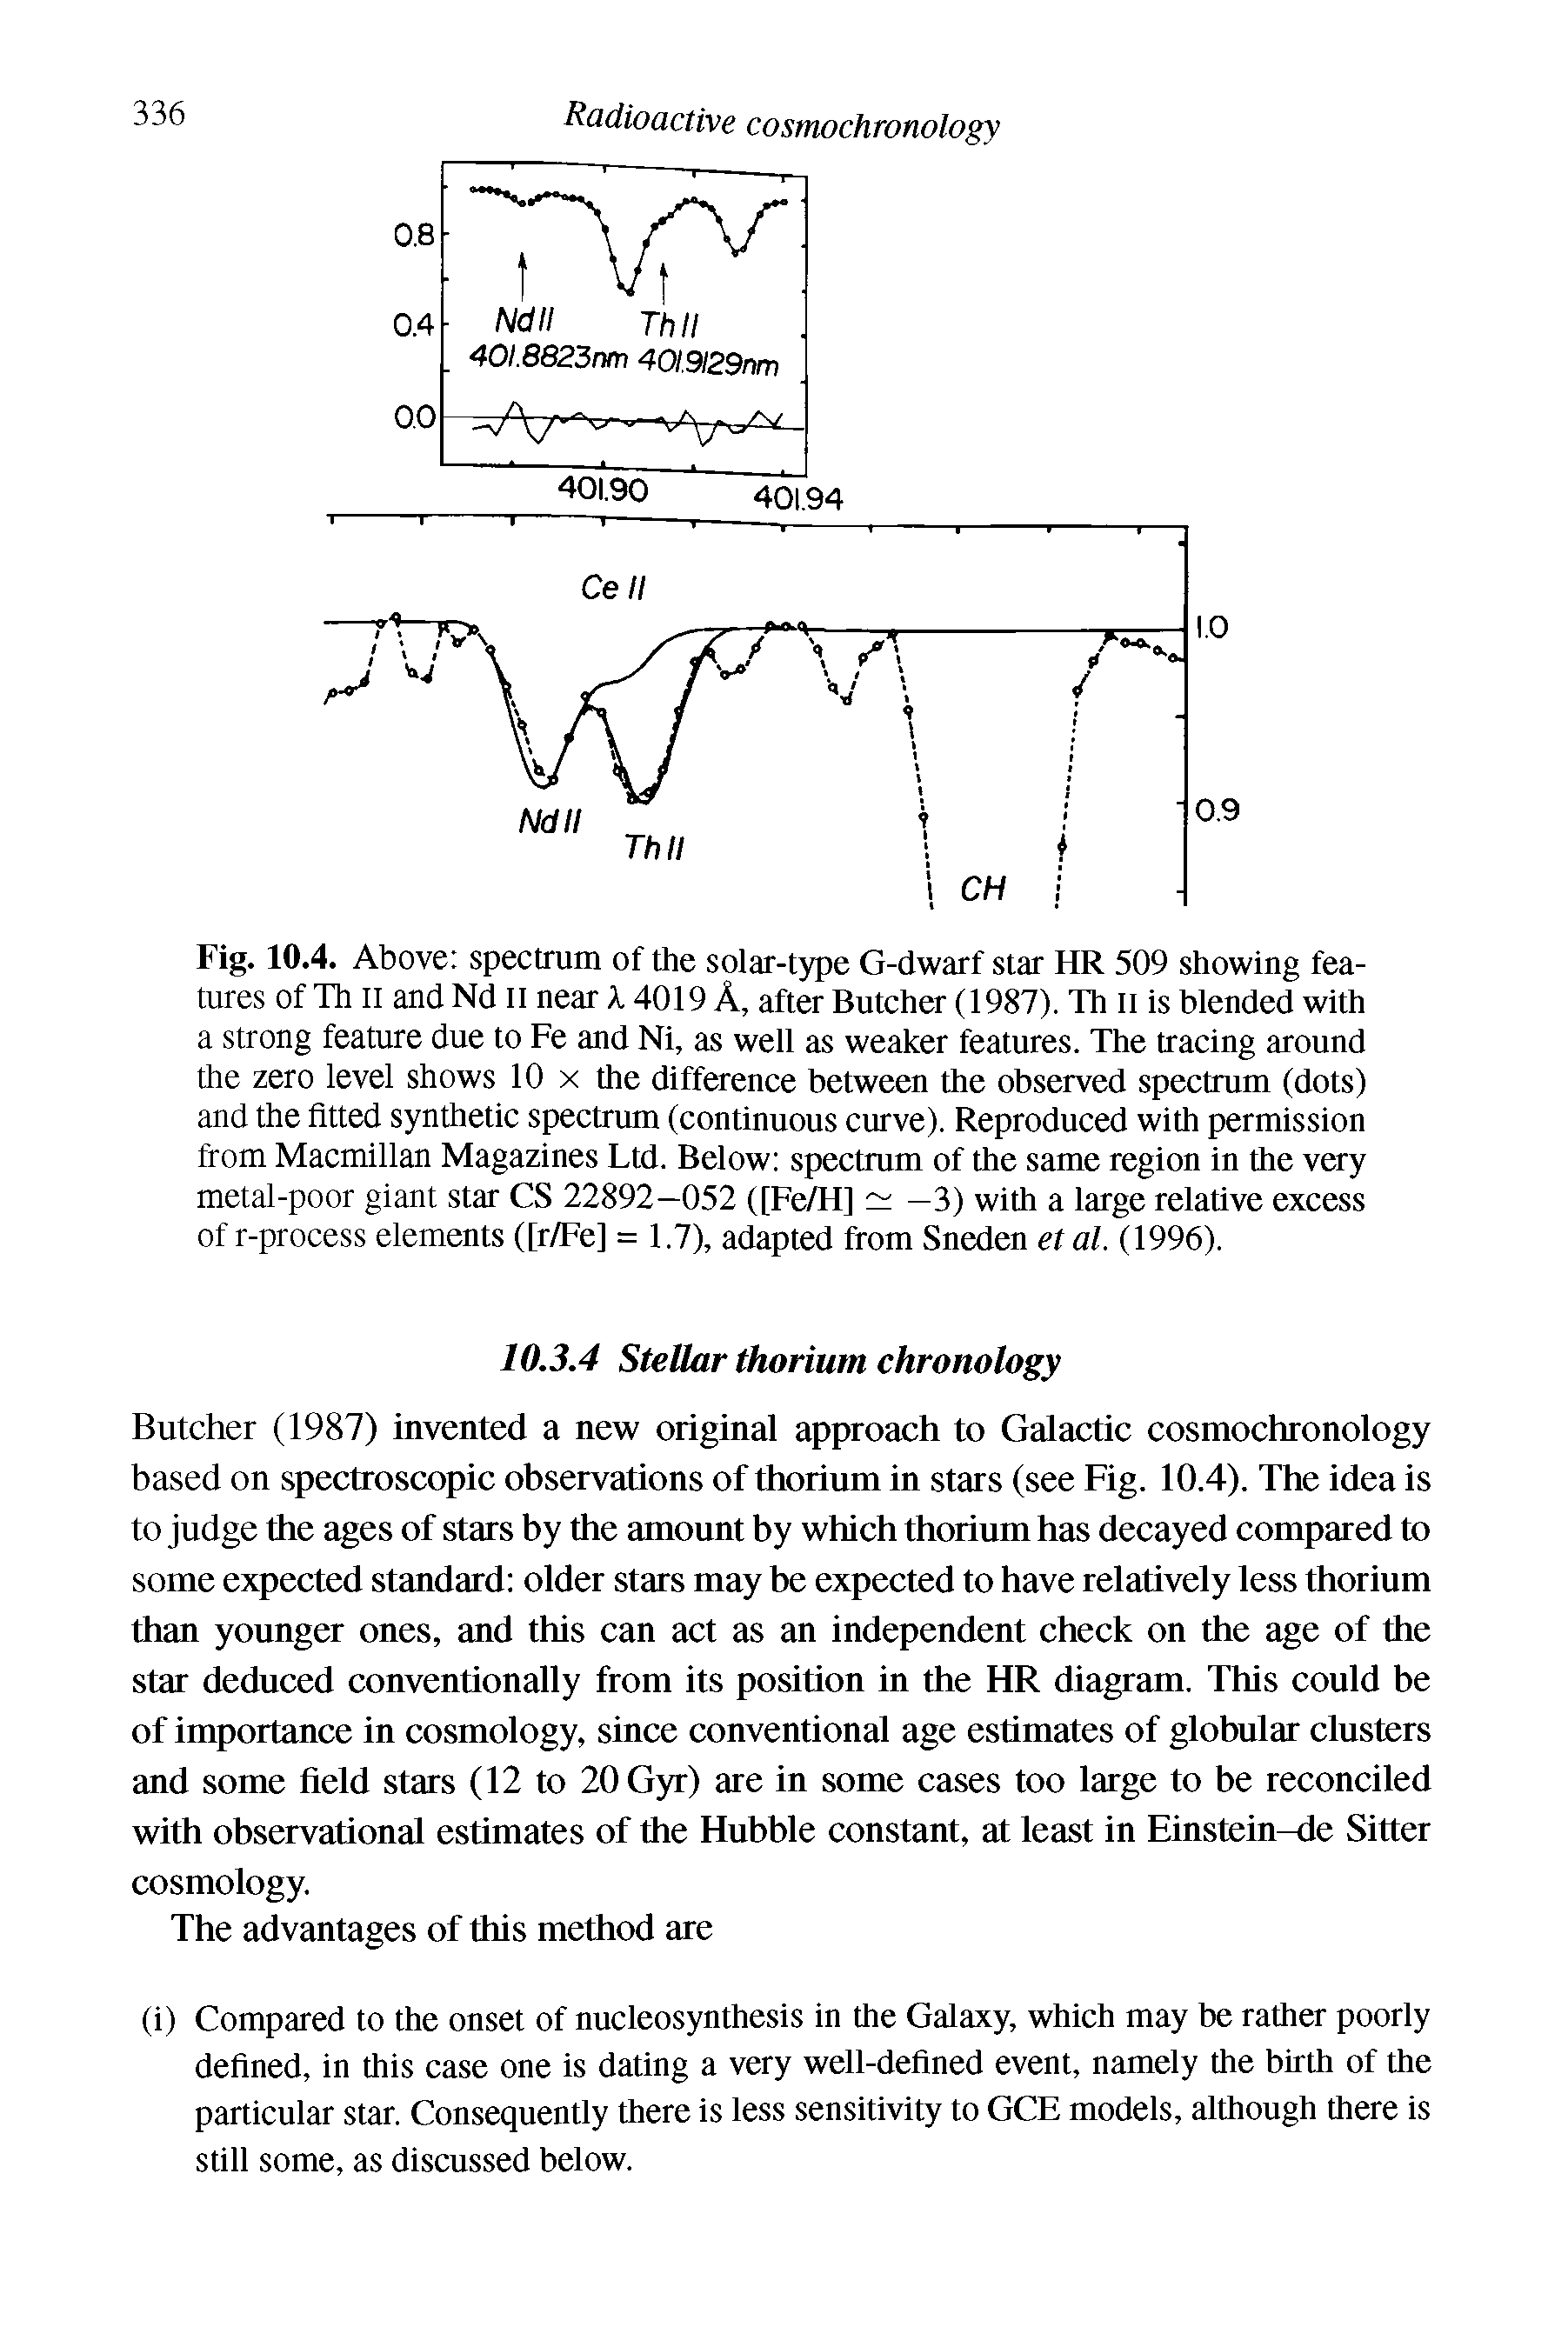 Fig. 10.4. Above spectrum of the solar-type G-dwarf star HR 509 showing features of Th ii and Nd n near k 4019 A, after Butcher (1987). Th ii is blended with a strong feature due to Fe and Ni, as well as weaker features. The tracing around the zero level shows 10 x the difference between the observed spectrum (dots) and the fitted synthetic spectrum (continuous curve). Reproduced with permission from Macmillan Magazines Ltd. Below spectrum of the same region in the very metal-poor giant star CS 22892—052 ([Fe/H] —3) with a large relative excess of r-process elements ([r/Fe] = 1.7), adapted from Sneden el al. (1996).